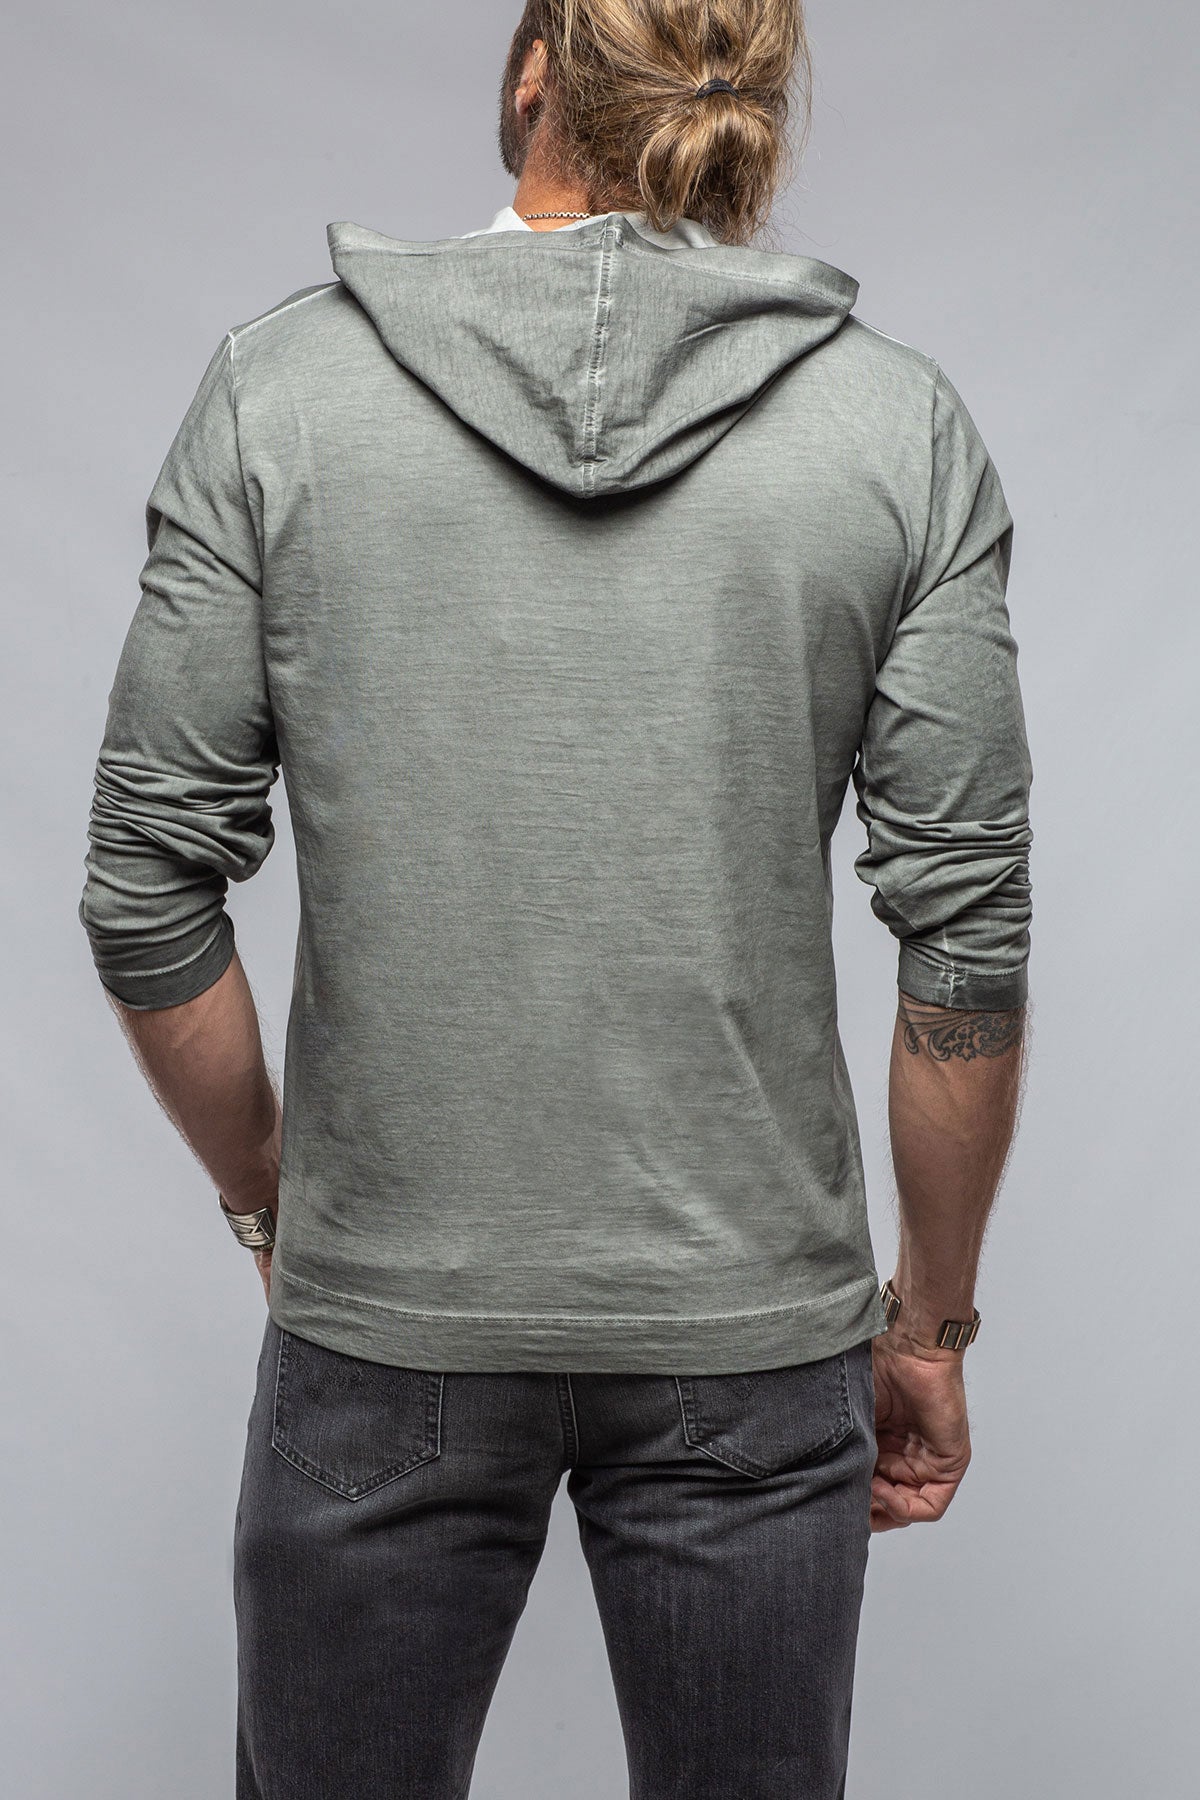 Ventura Hooded Tee in Steel | Mens - Shirts - T-Shirts | Gimo's Cotton